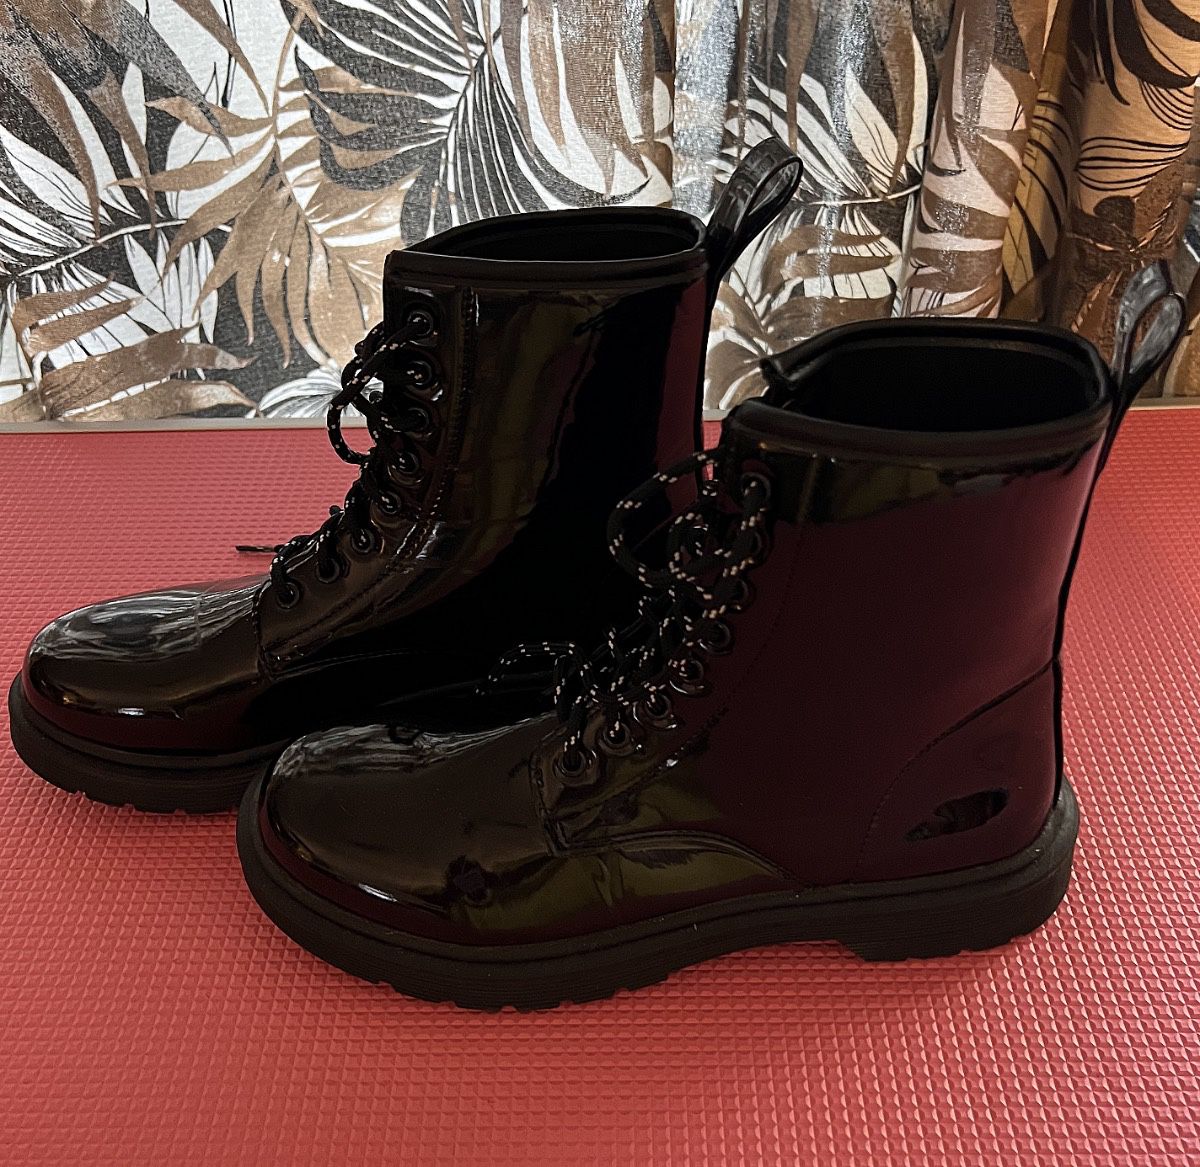 Retro Black Patent Leather Lace Up Boots